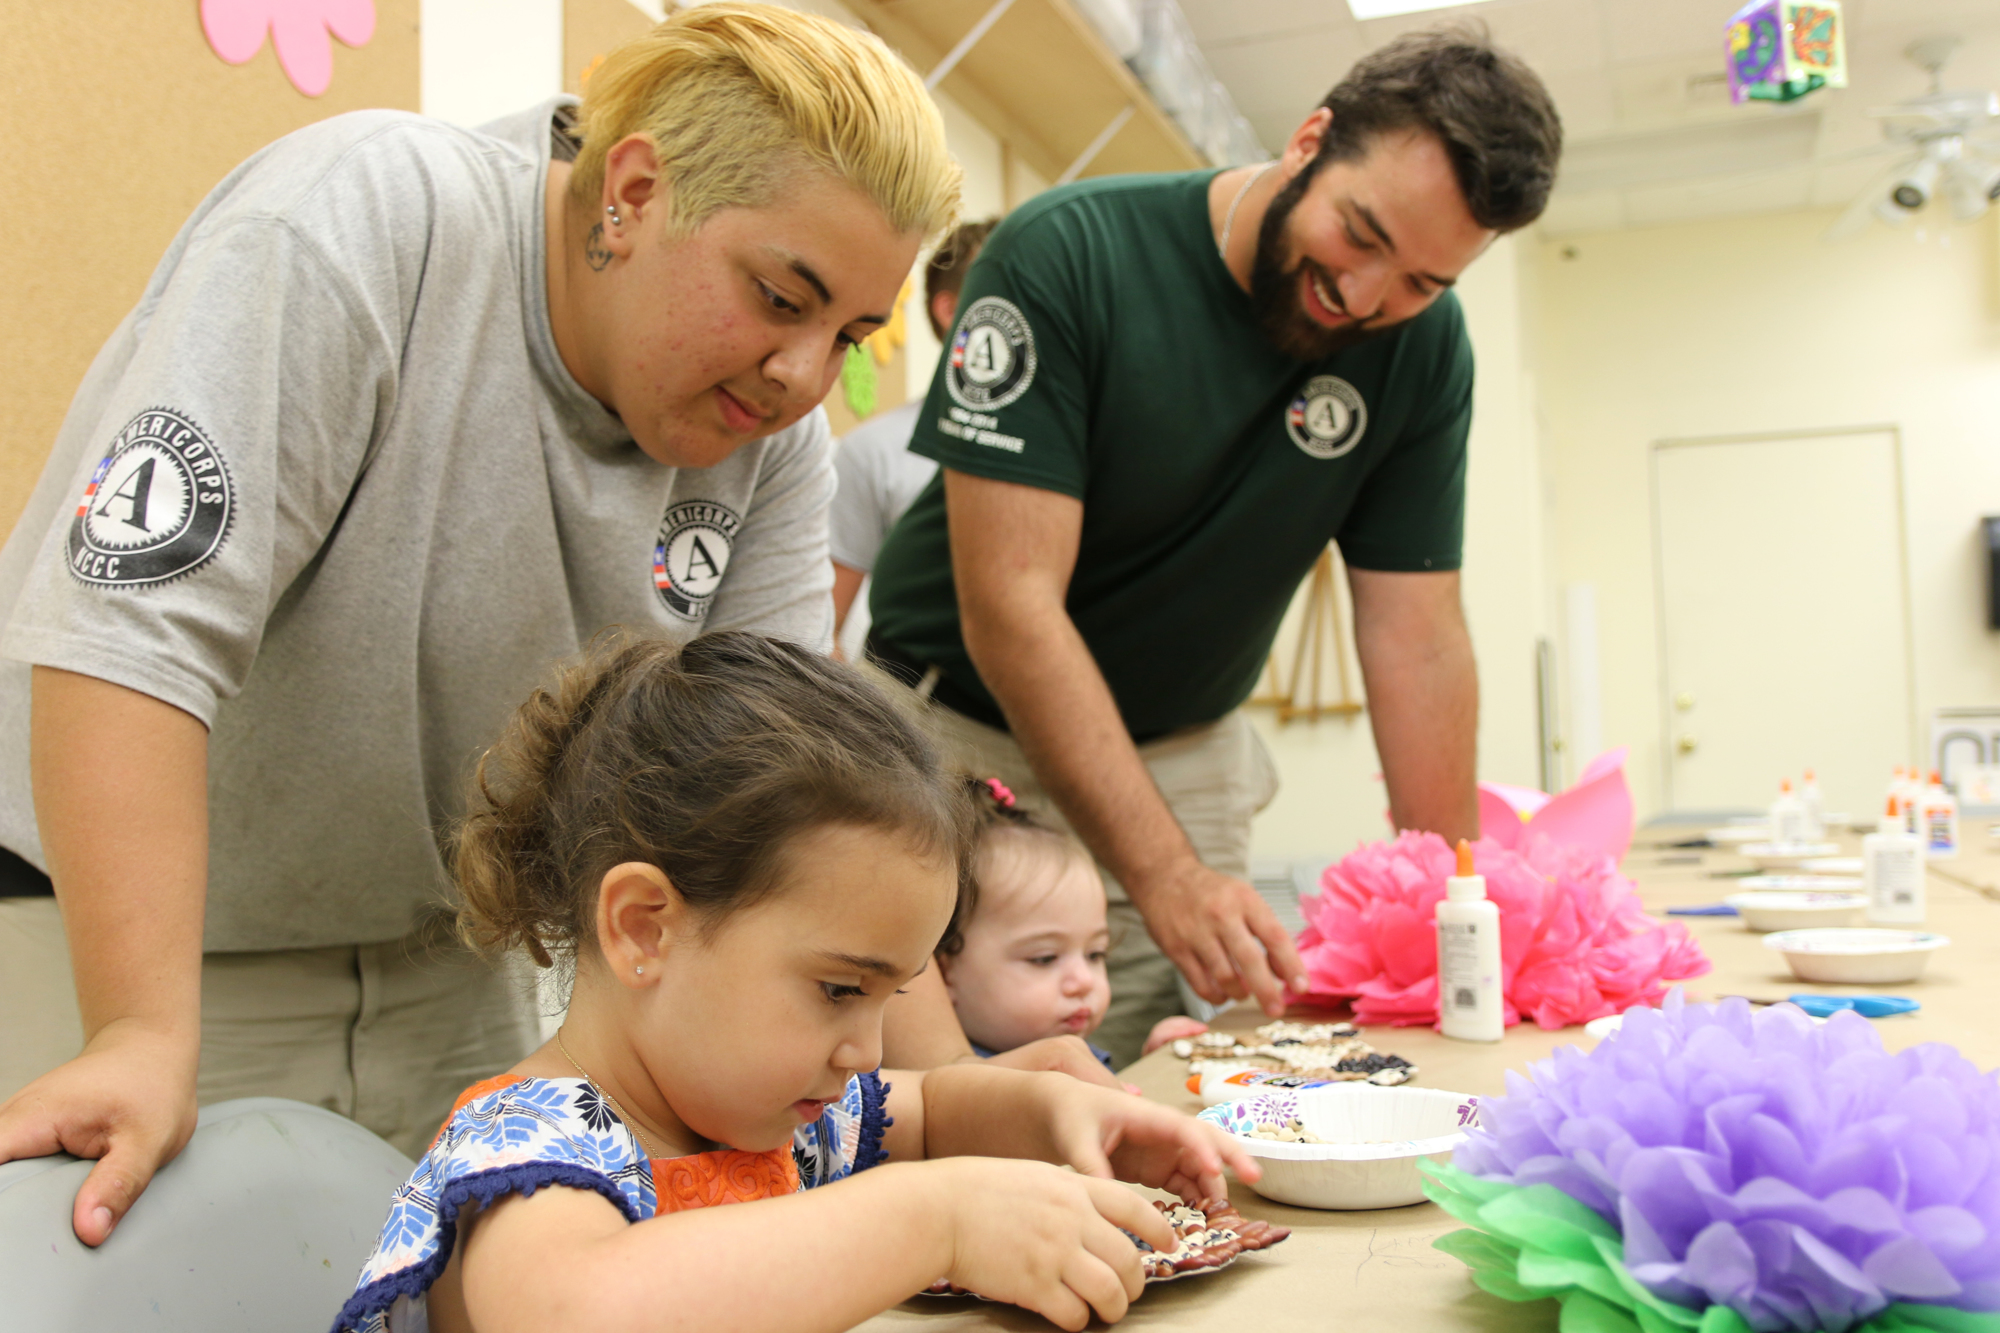 Dominic Del Castillo and Team Leader Pierce Curran help Adeline and Marlowe Frankel during OMAM's Free Family Art Night on Friday, Sept. 7. Photo by Jarleene Almenas